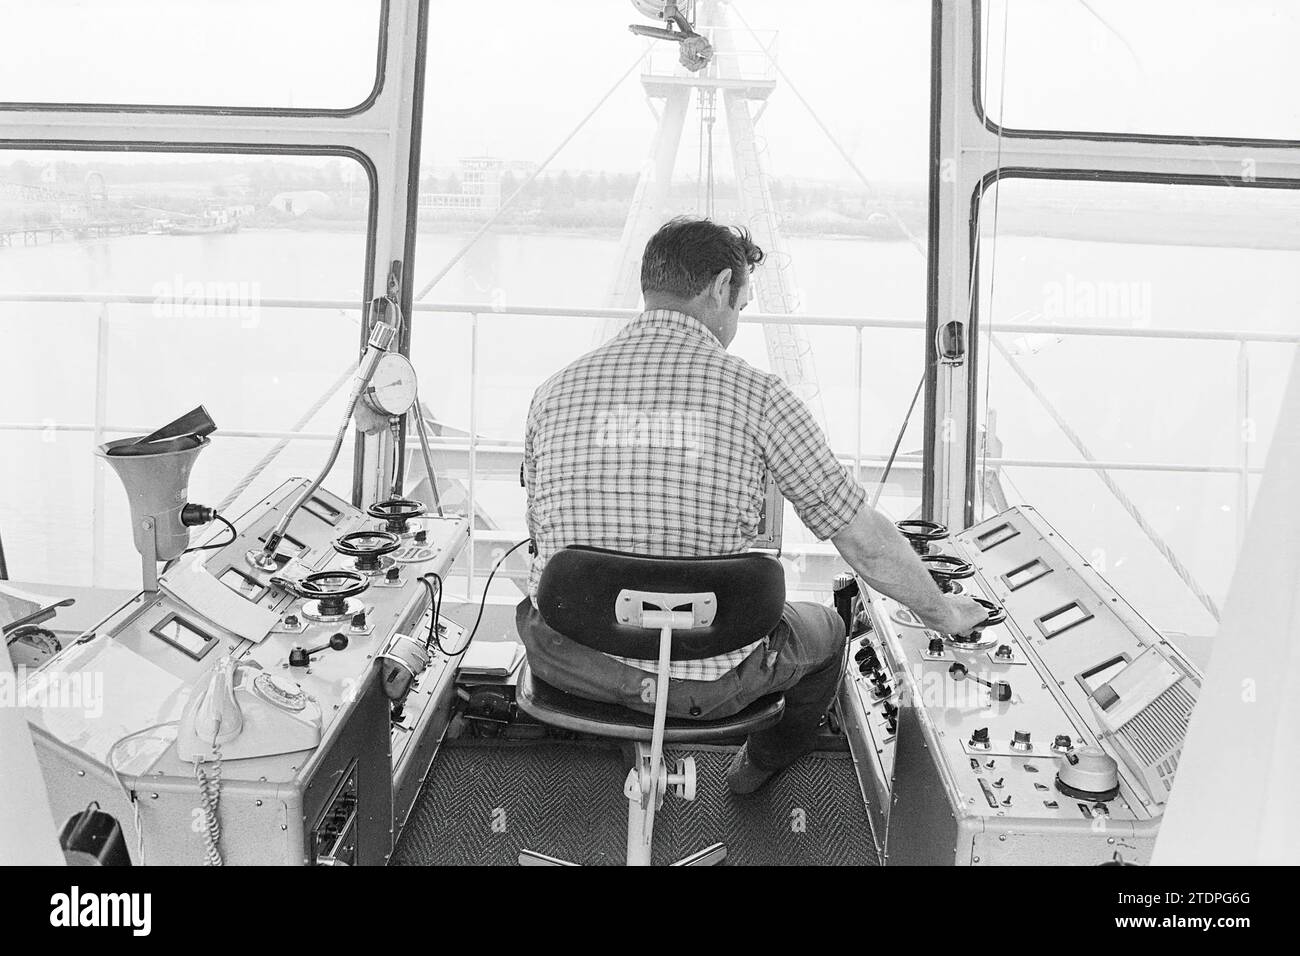 Wheelhouse, Whizgle News from the Past, Tailored for the Future. Explore historical narratives, Dutch The Netherlands agency image with a modern perspective, bridging the gap between yesterday's events and tomorrow's insights. A timeless journey shaping the stories that shape our future Stock Photo